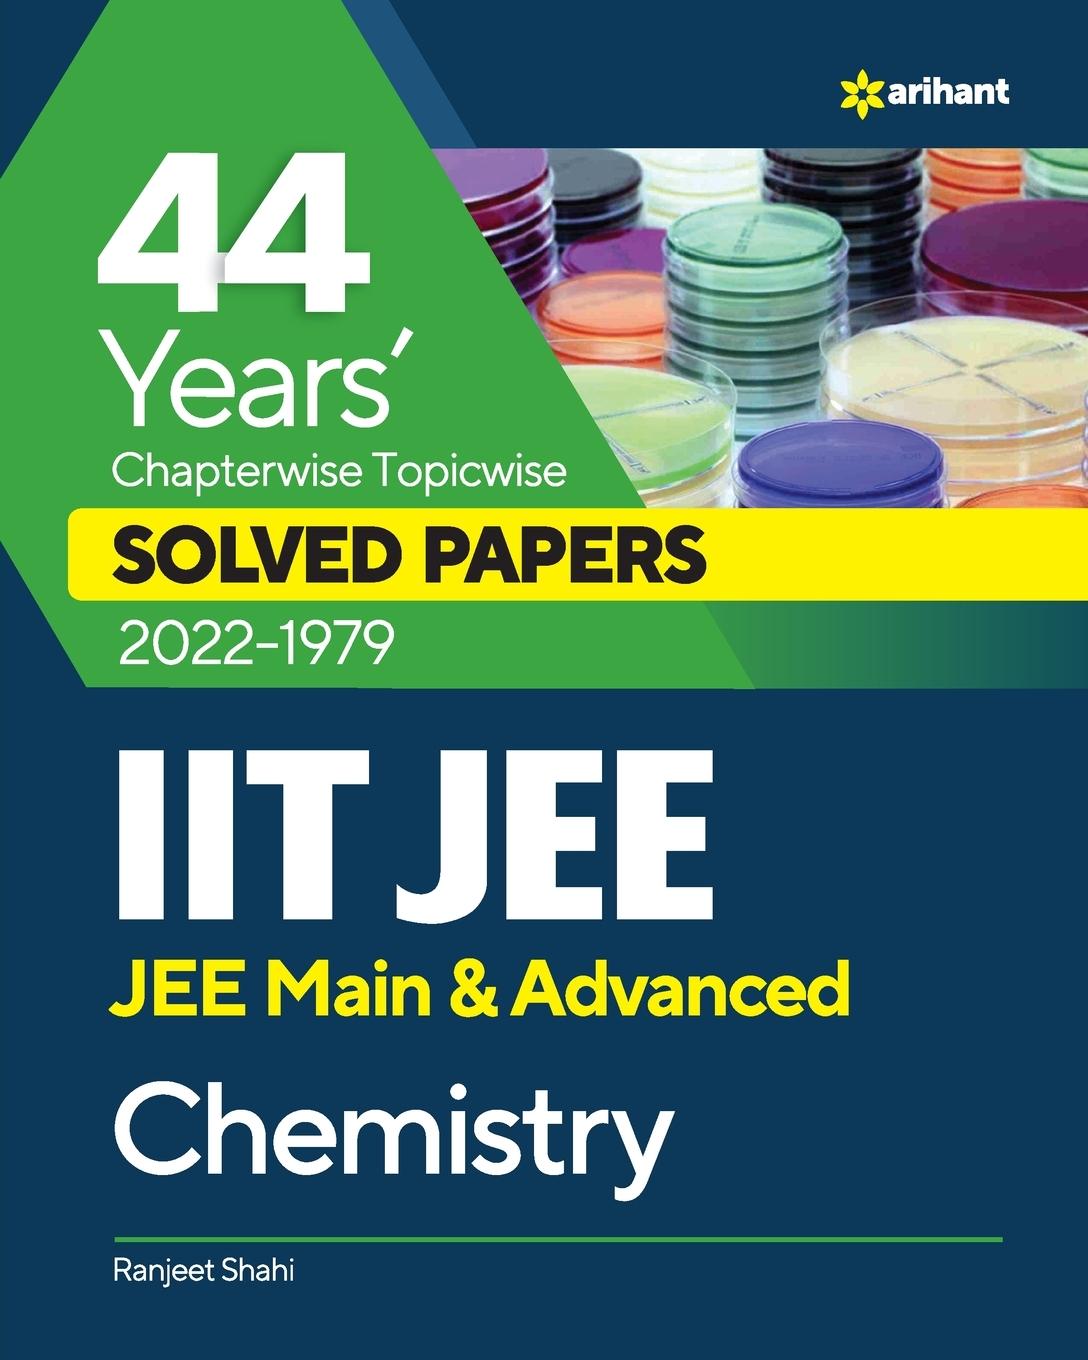 Kniha 44 Years  Chapterwise Topicwise Solved Papers (2022-1979) IIT JEE Chemistry 